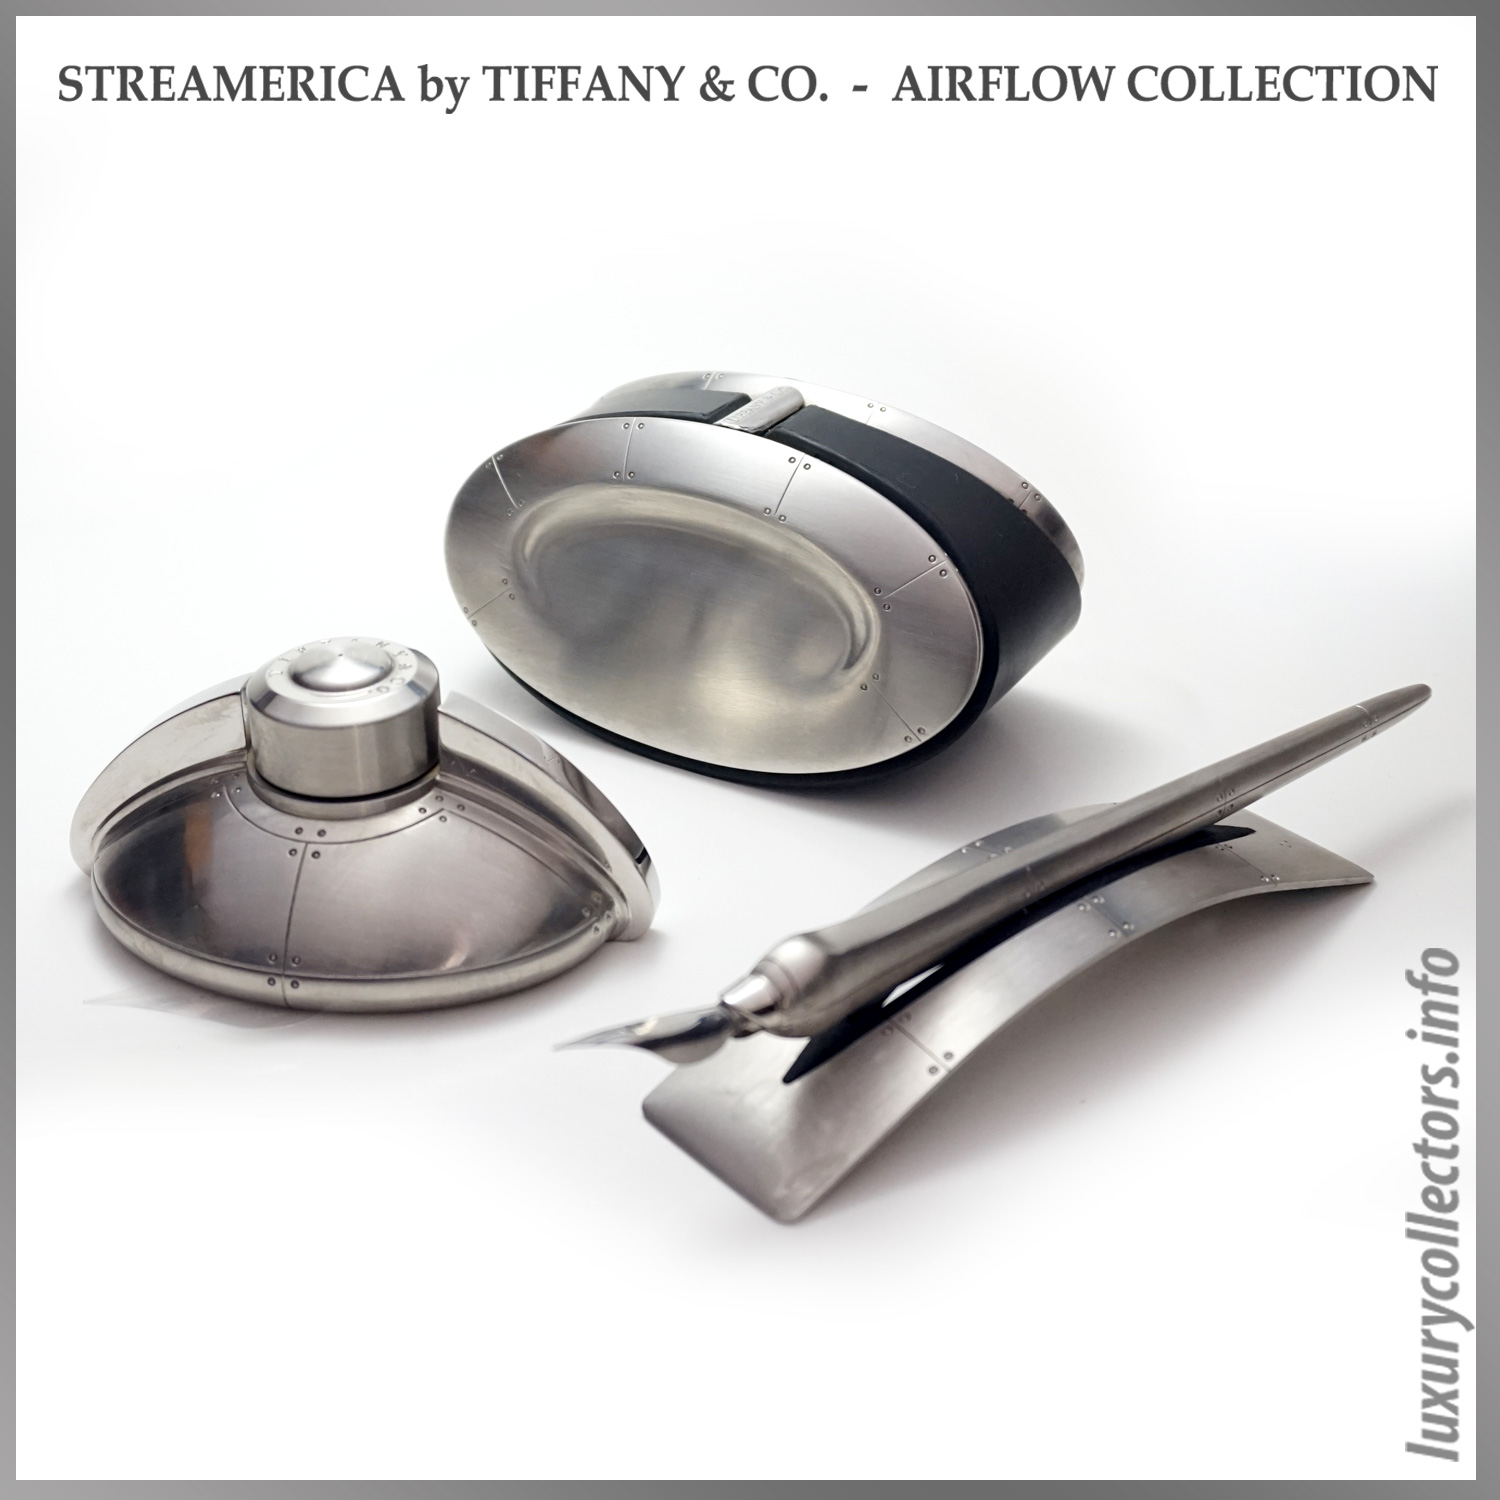 Tiffany & and Co. Streamerica Airflow Ink Blotter Inkwell Inkpen Pen Ink Stand Stainless Steel 1993 Collection